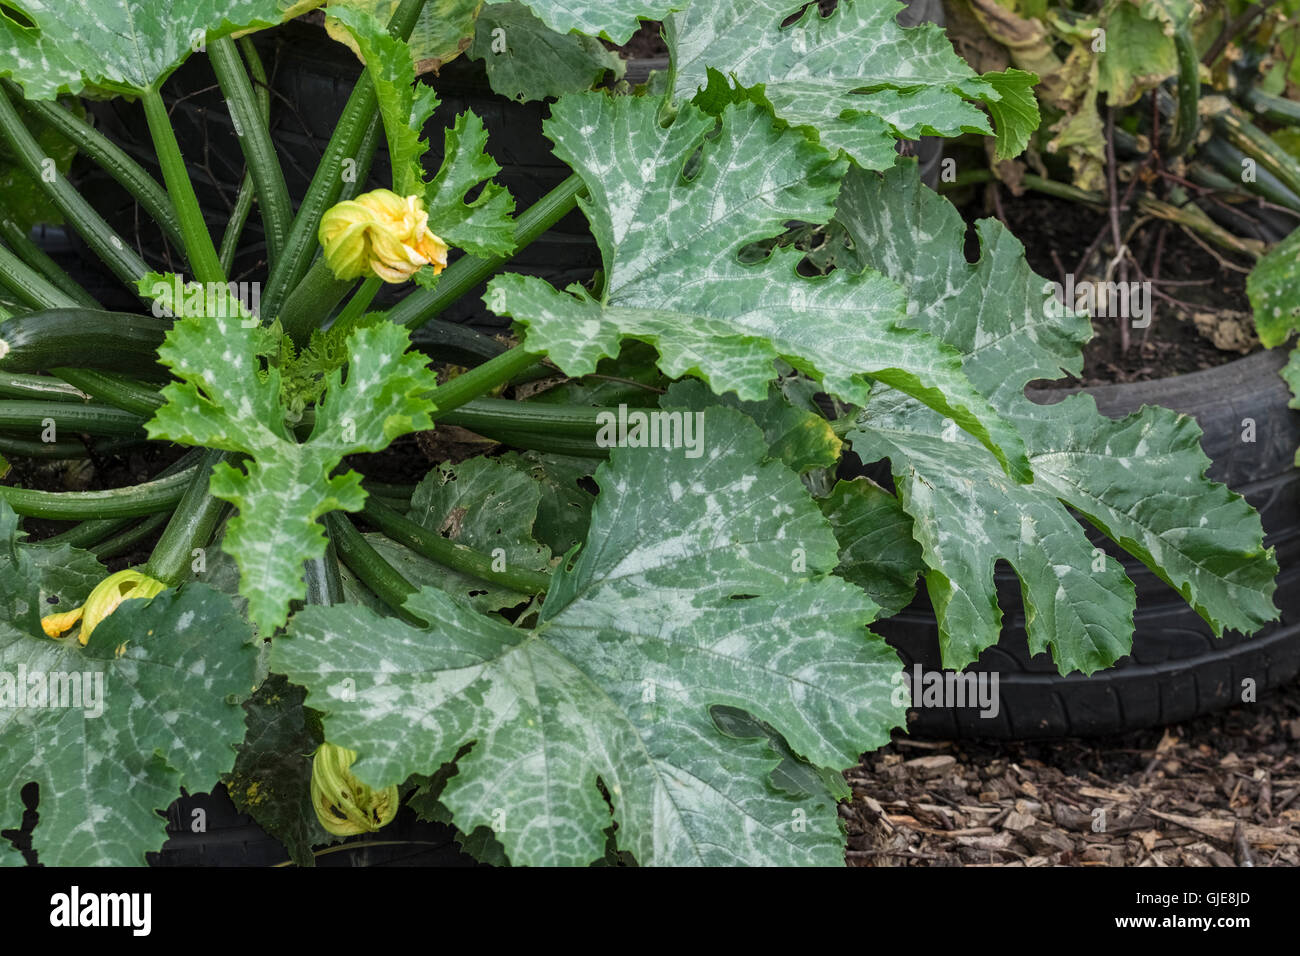 Courgette plants grown in old vehicle tyres. Stock Photo